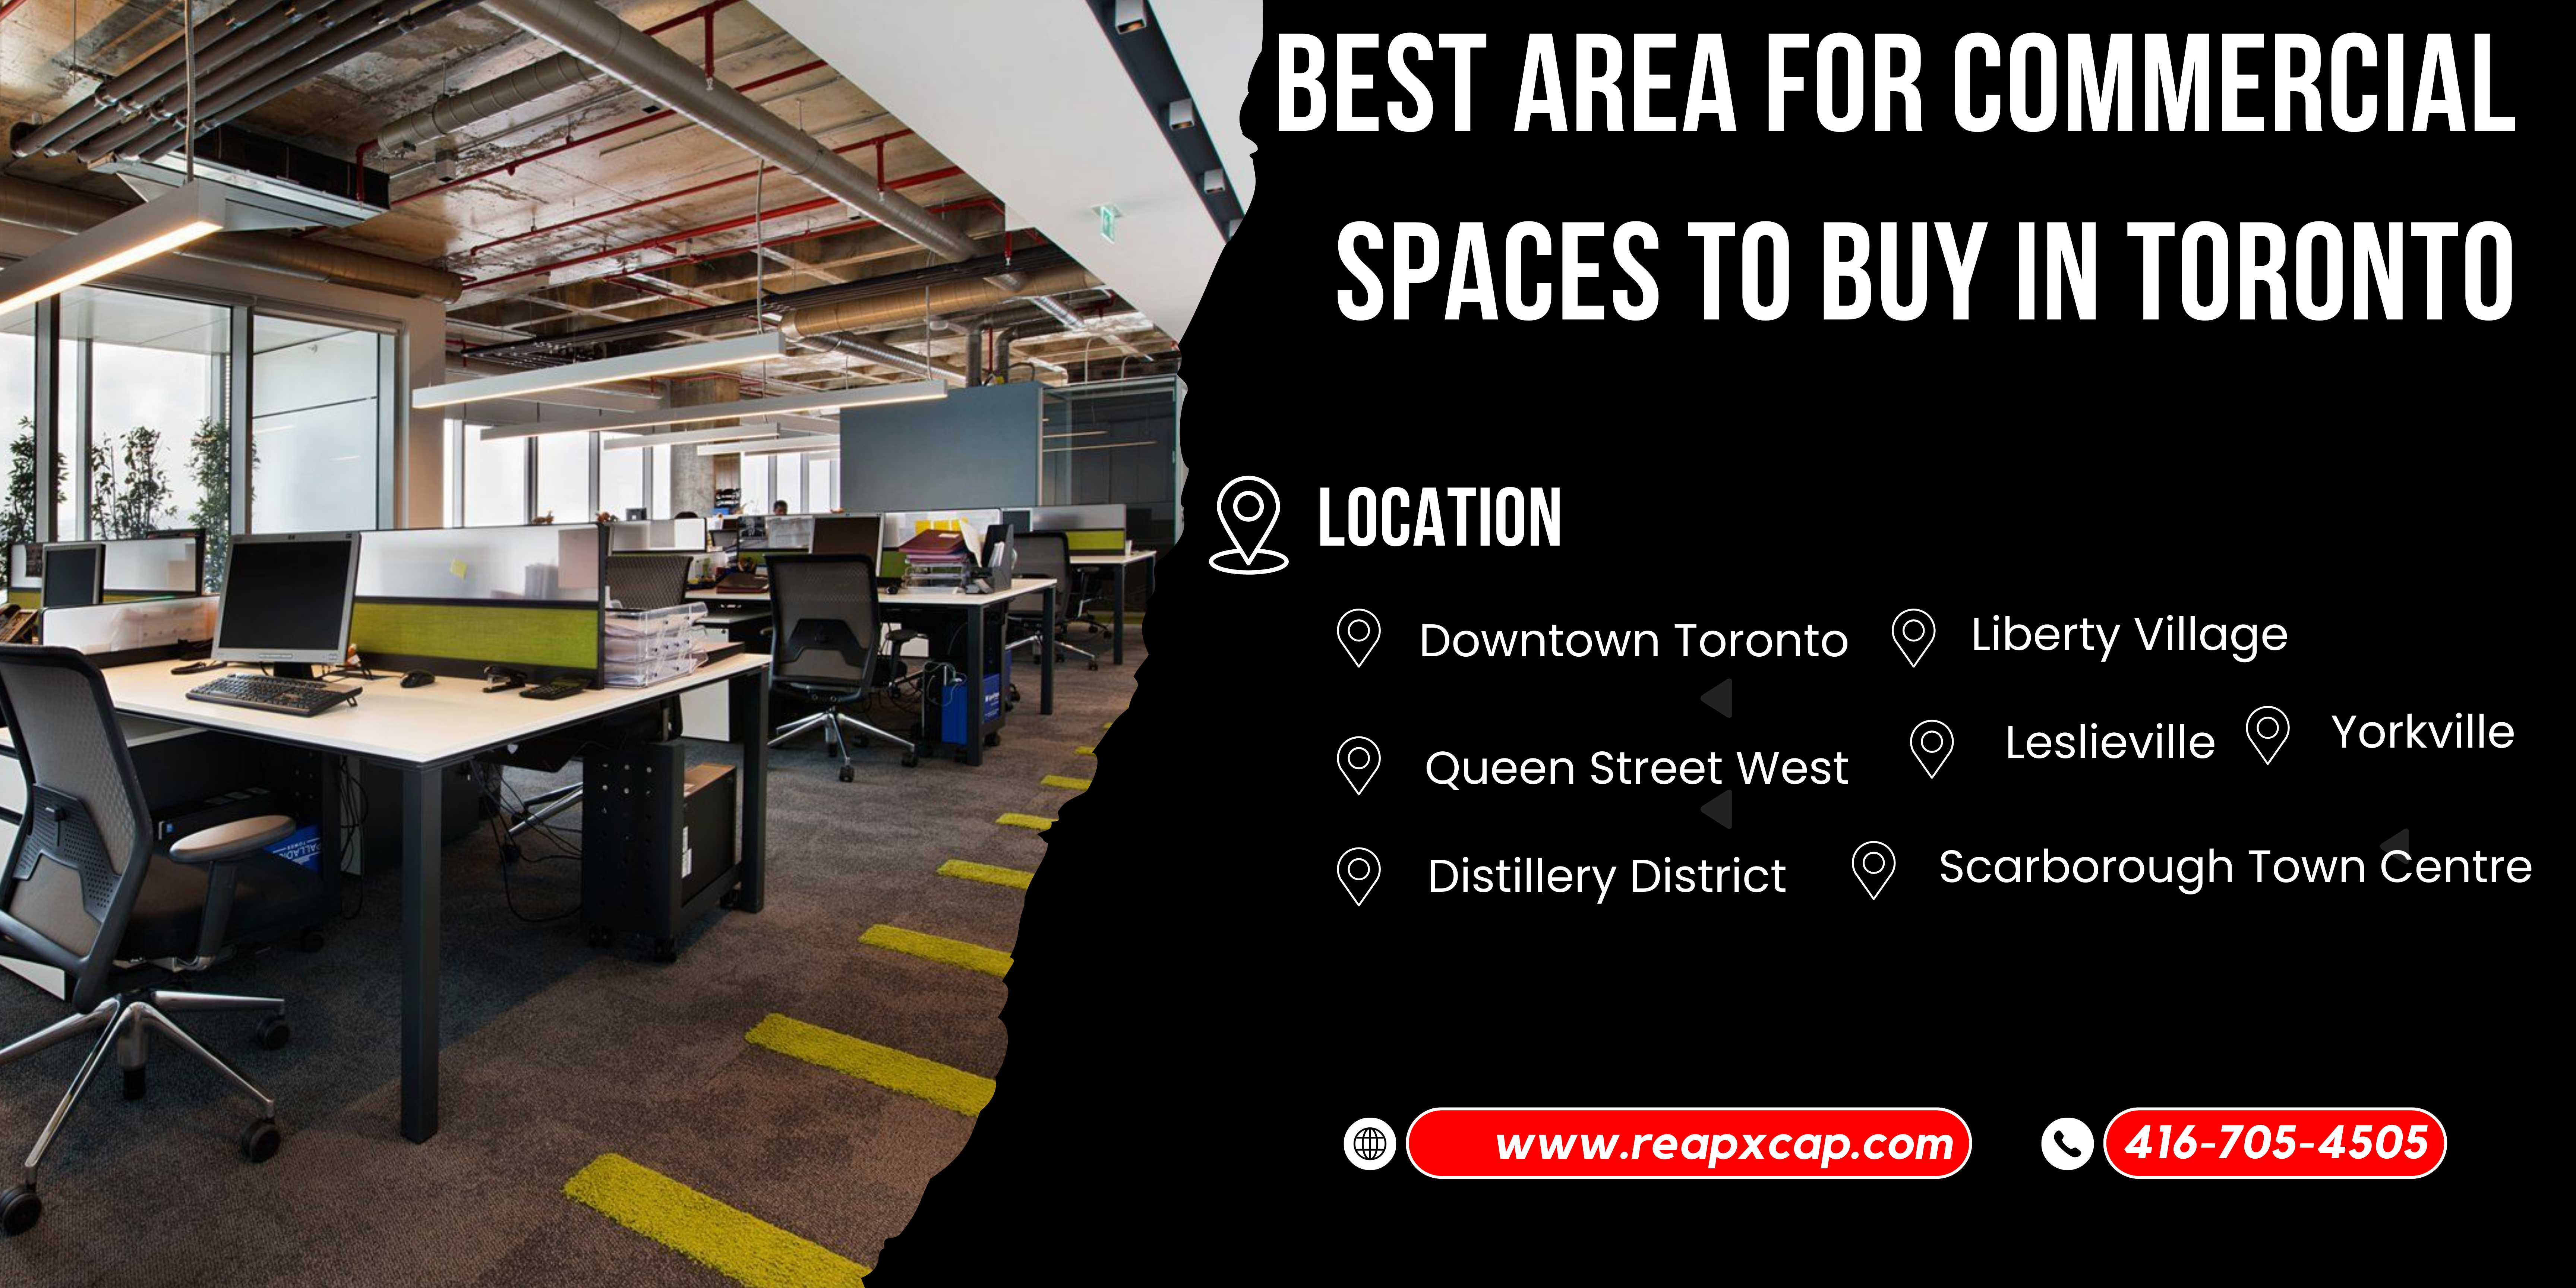 Best Deals Available for Commercial Space for Sale in Toronto Check Now Best Area for Commercial Spaces to Buy in Toronto